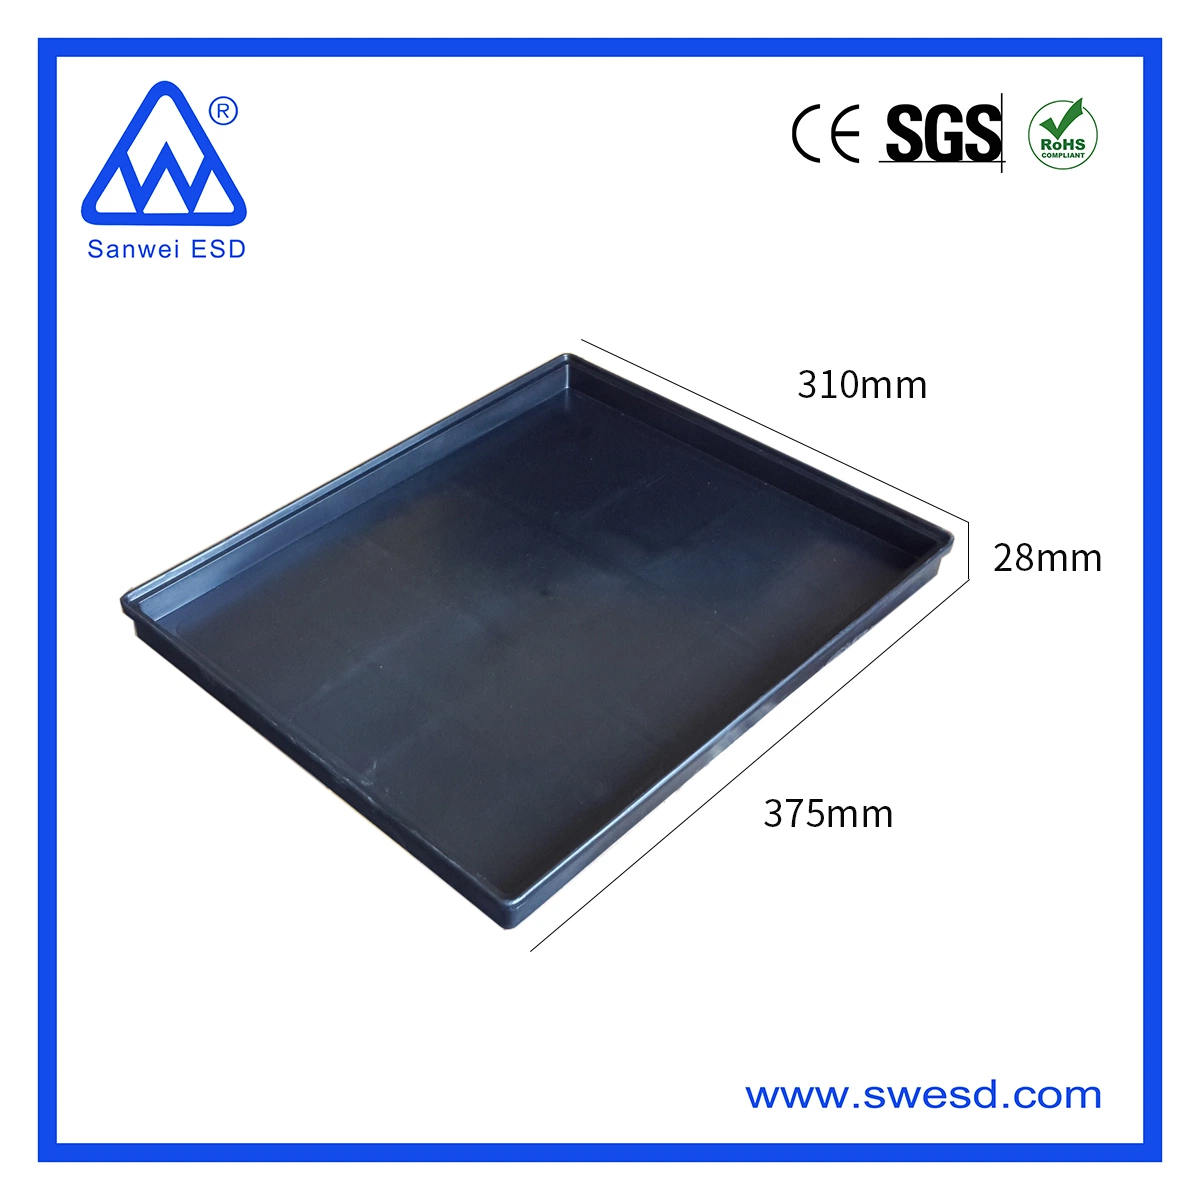 SMT Antistatic Tray Storage Parts Components Box Anti-Static ESD